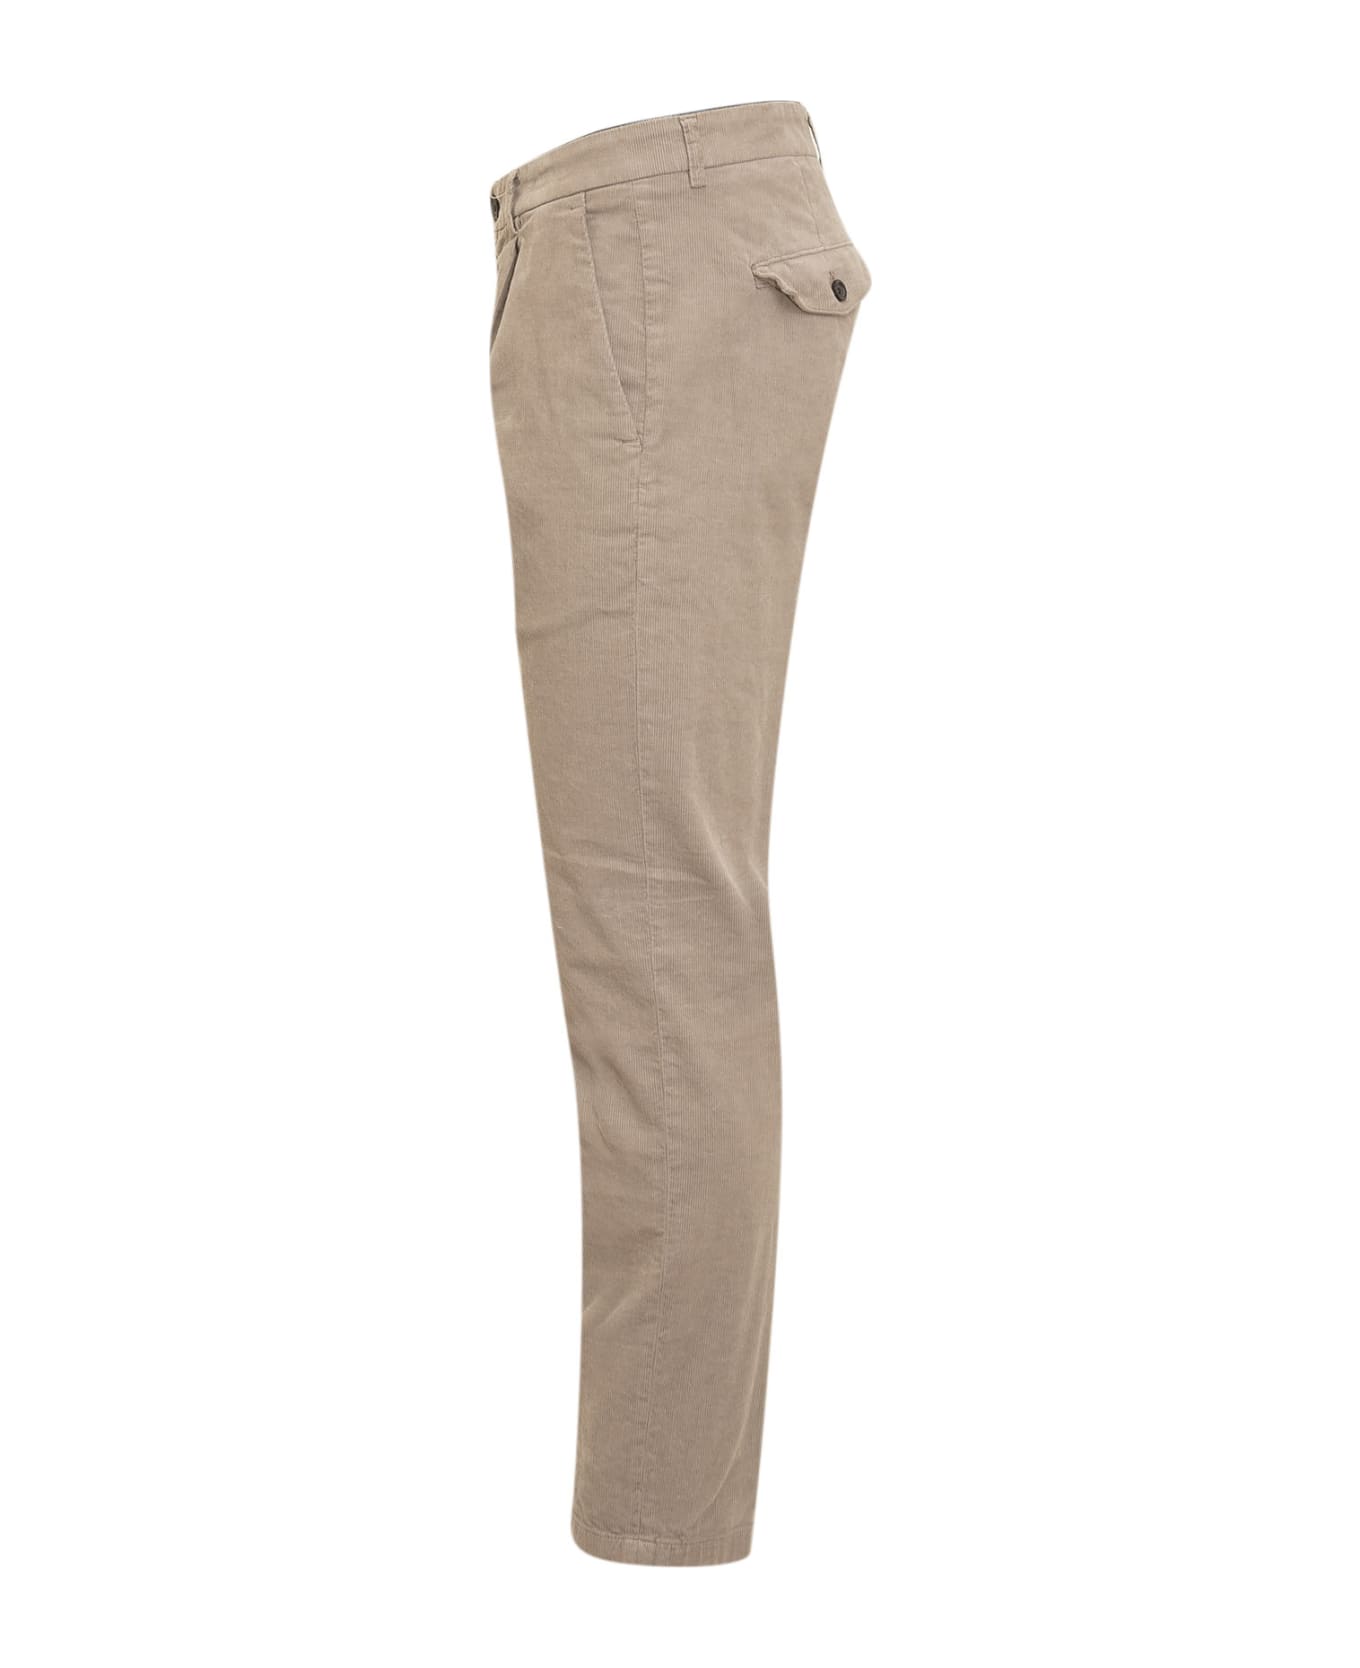 Department Five Prince Trousers Chinos - SAND ボトムス